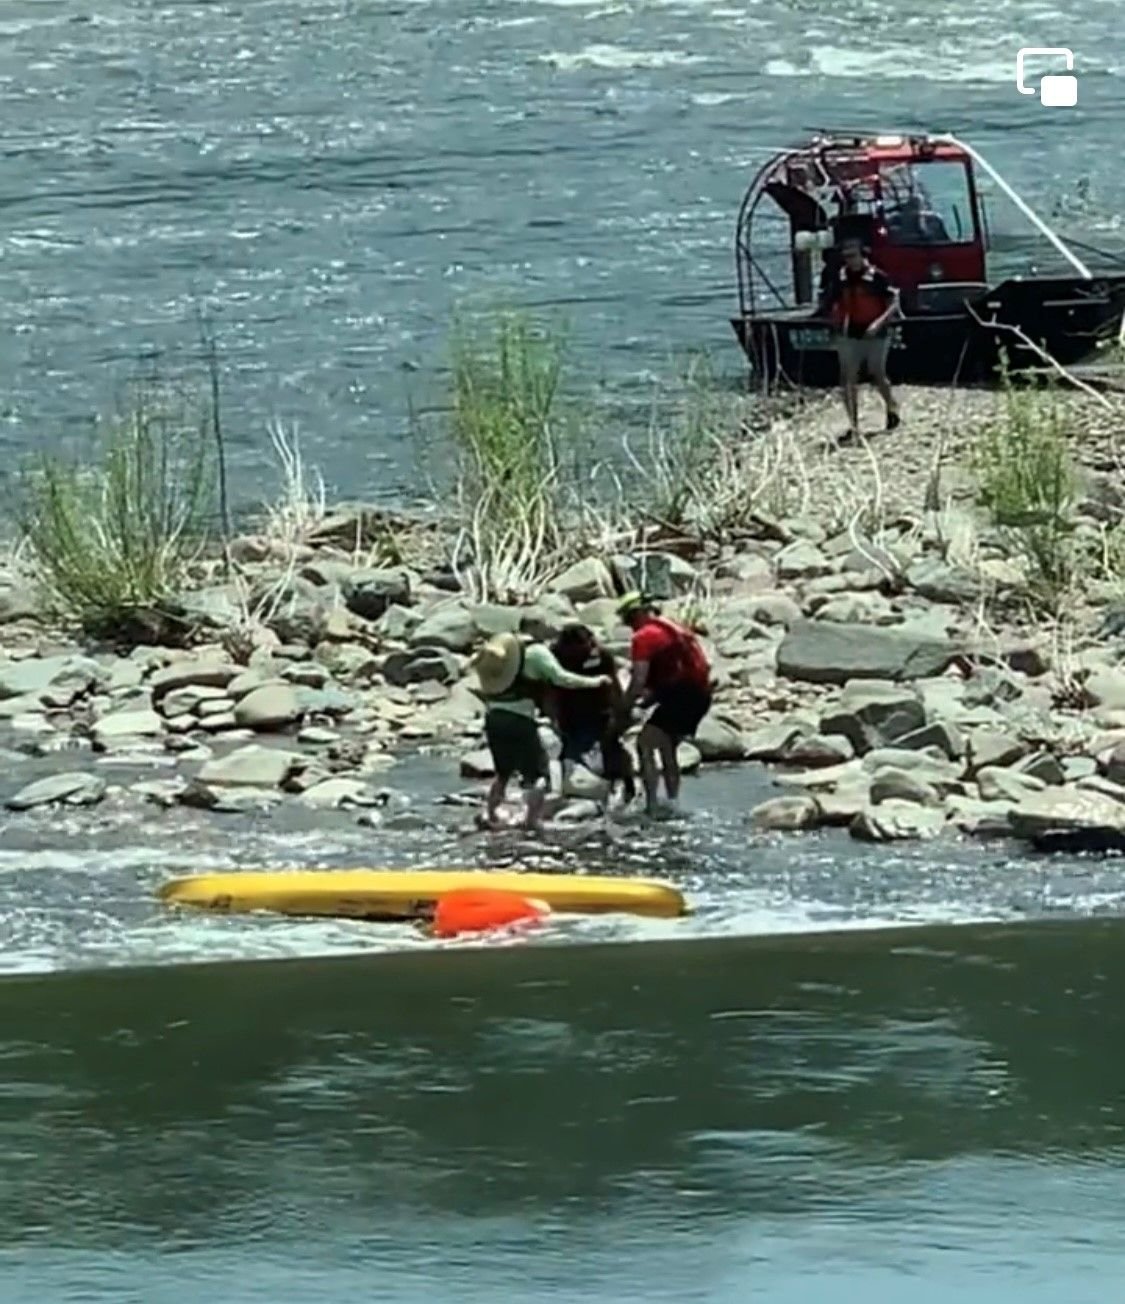 Rescuers come to the aid of kayakers in the Delaware River in New Hope after one overturned.